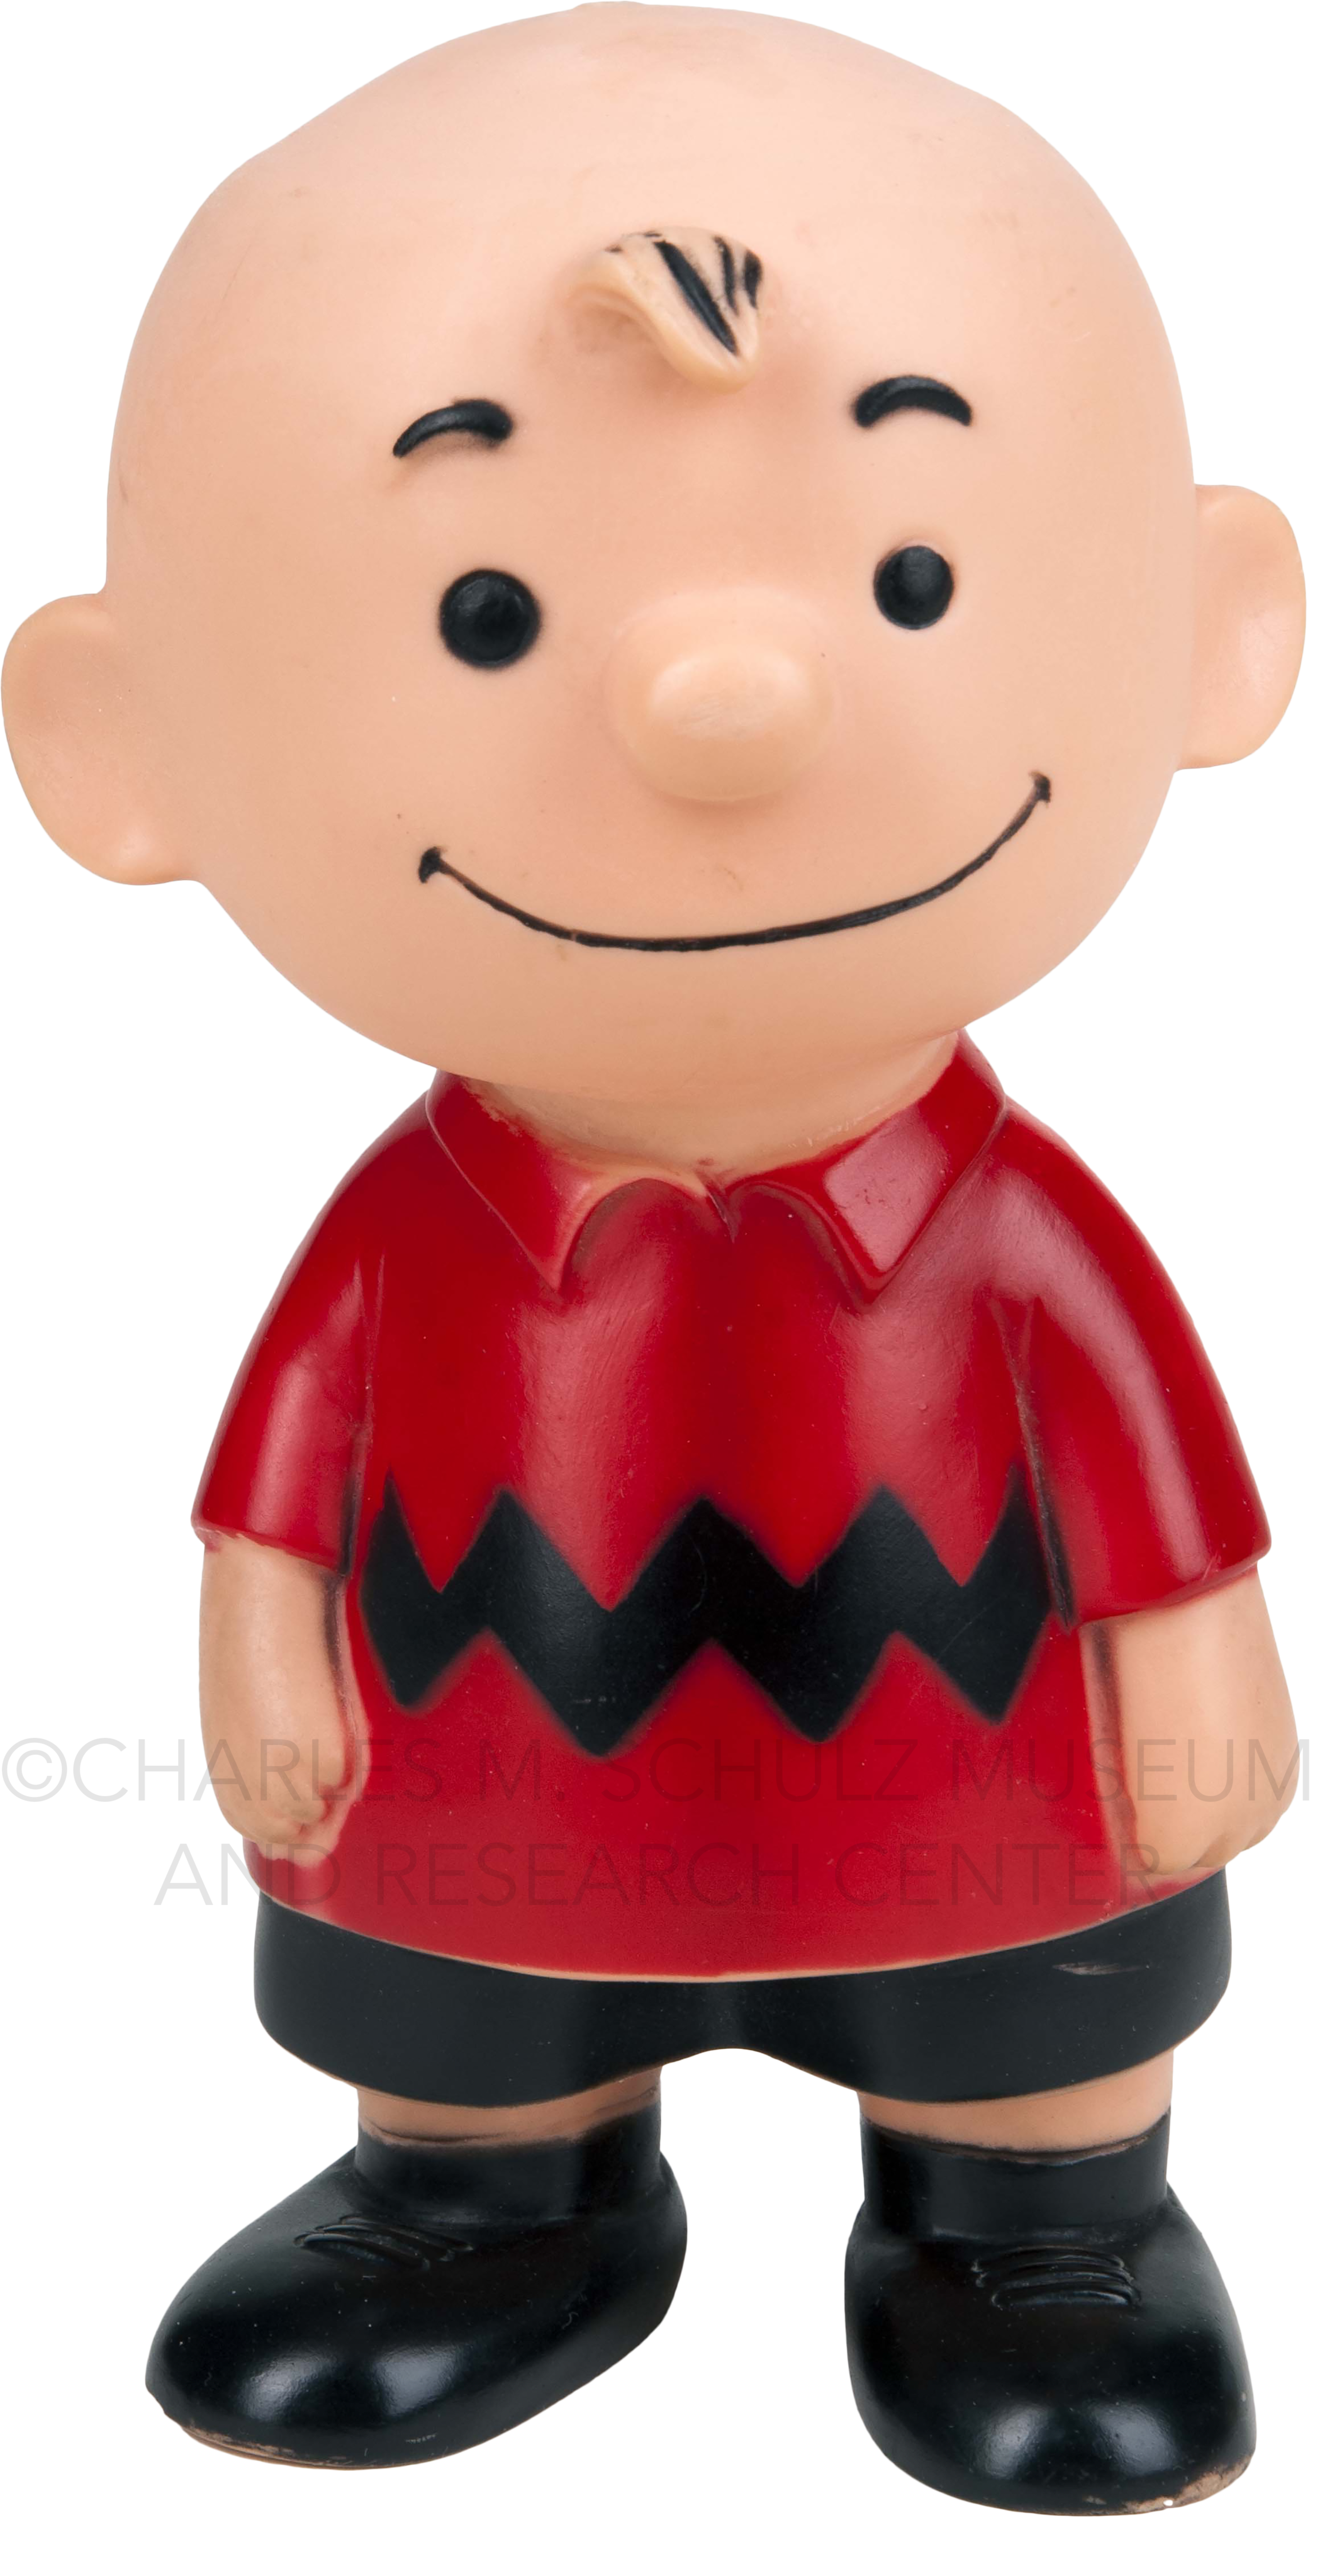 70 Years of Peanuts - Charles M. Schulz Museum